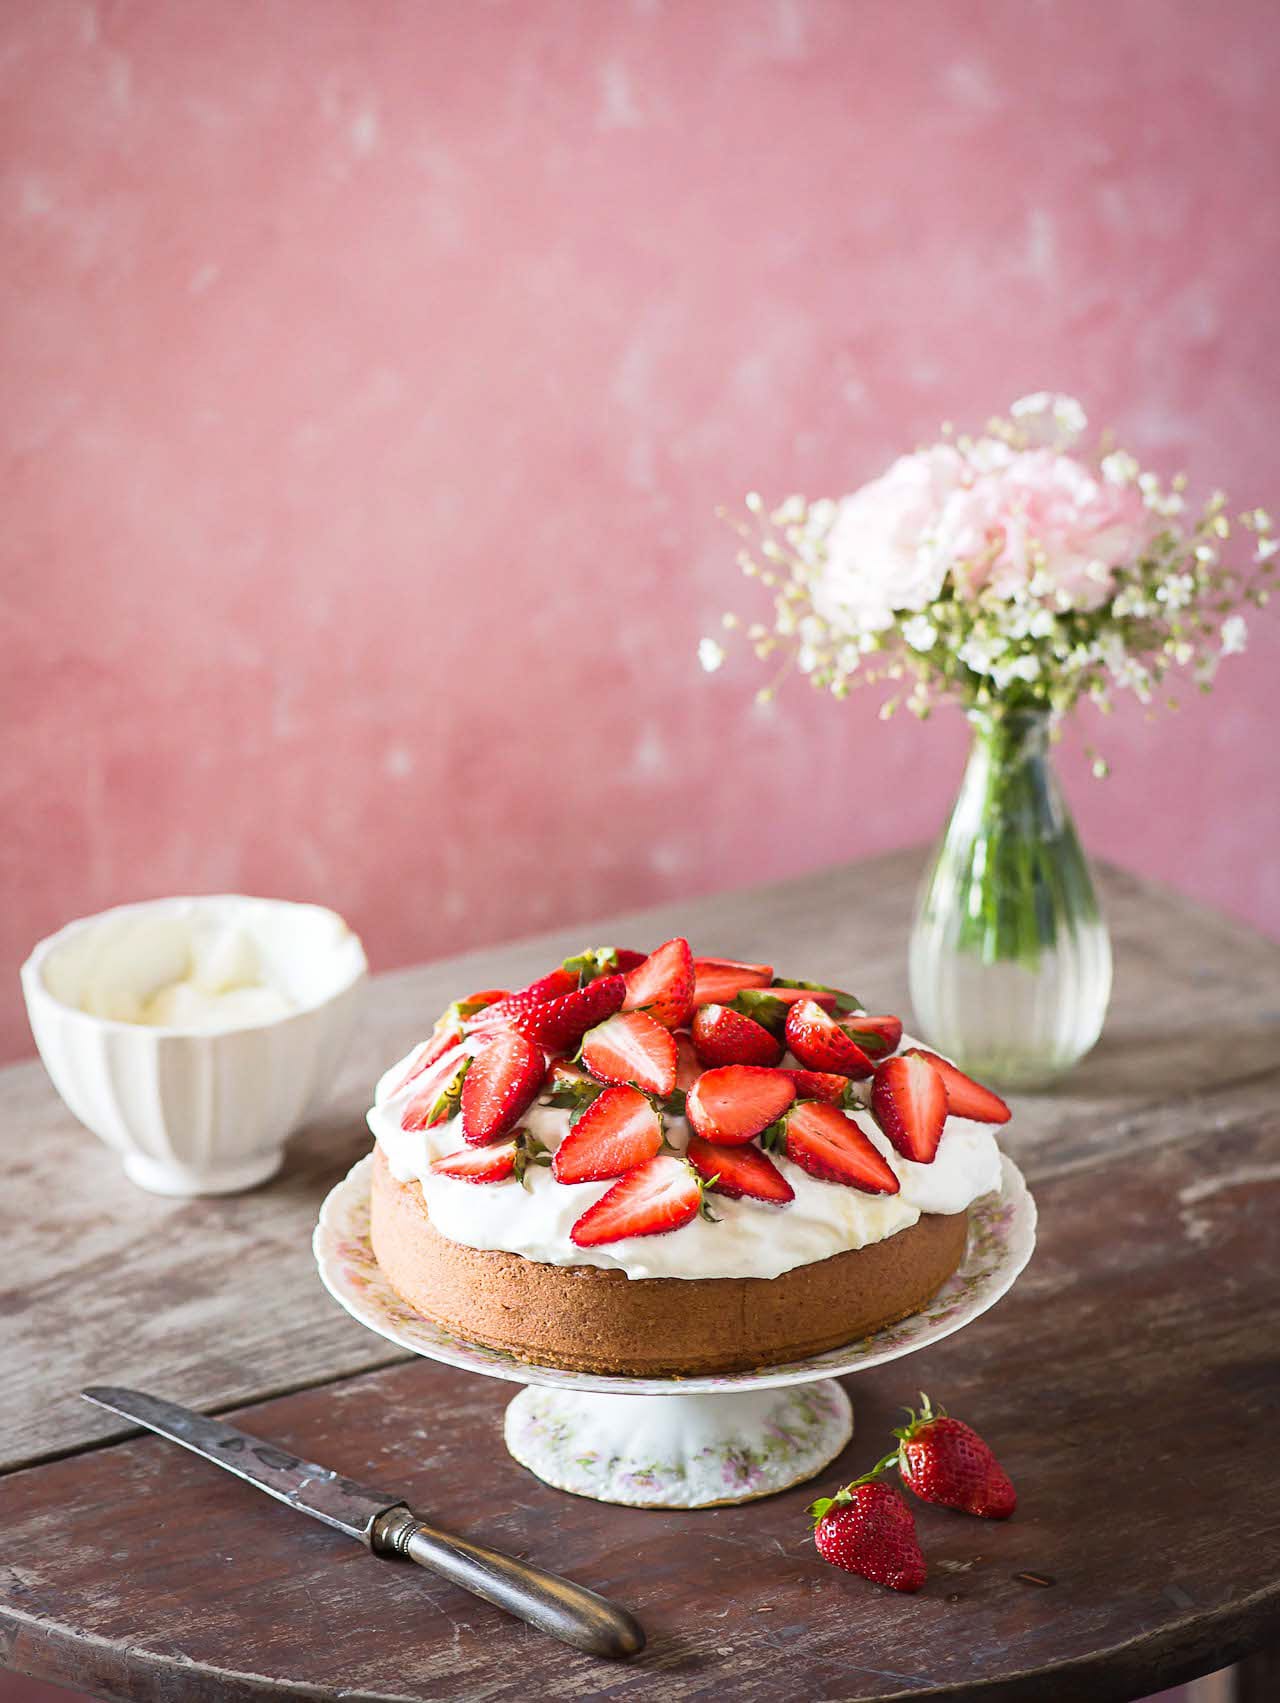 Roasted Almonds Cake With Strawberries & Cream (The White Ramekins) | Playful Cooking